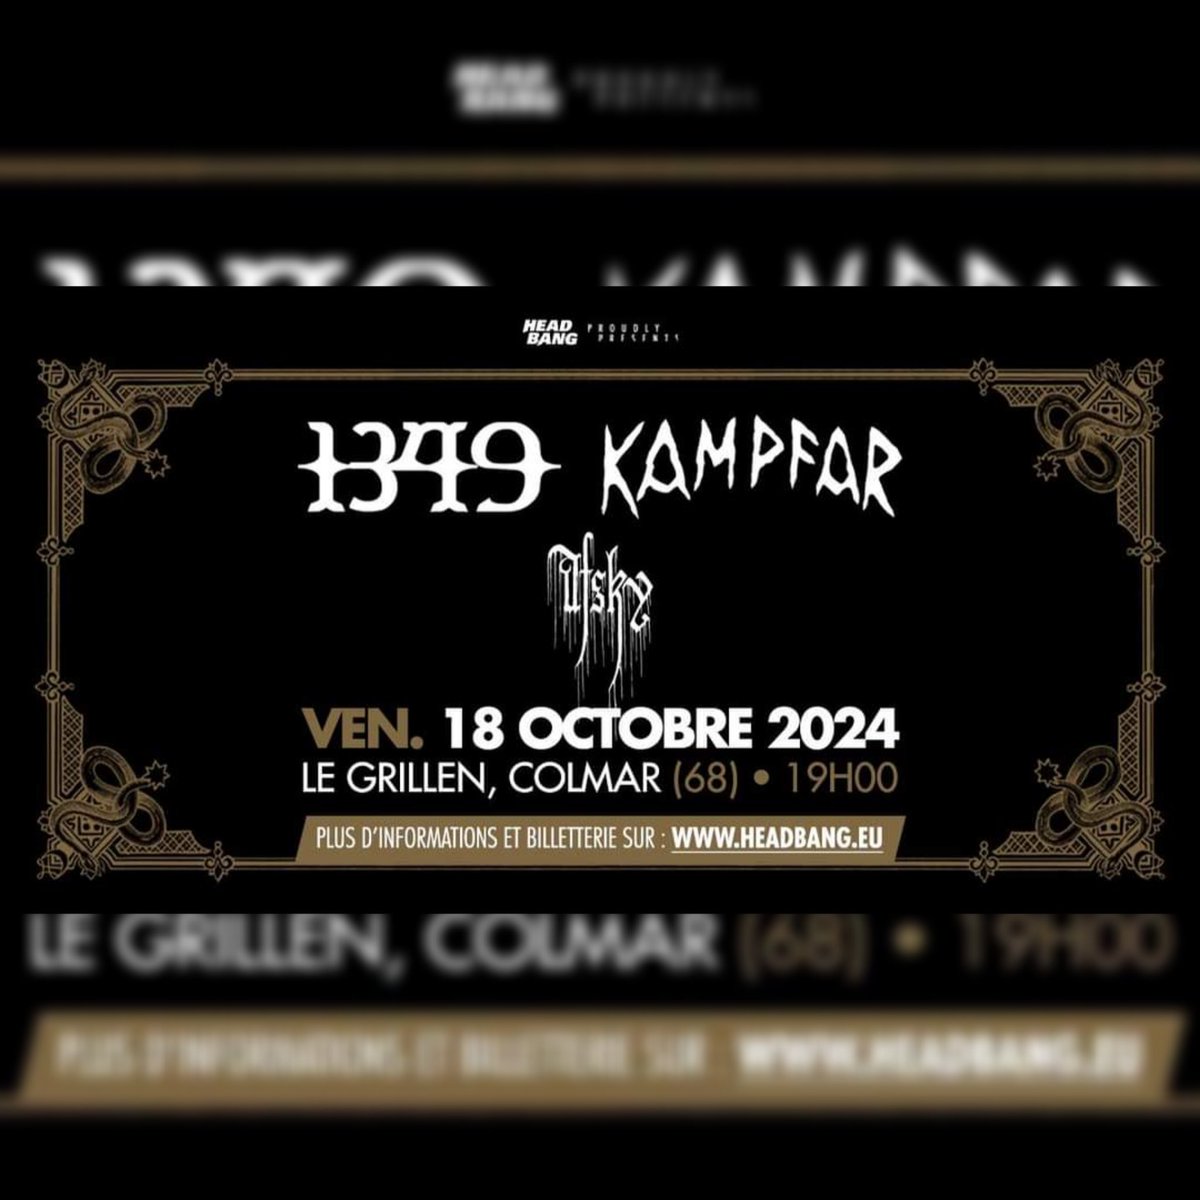 AURAL HELLFIRE ARRIVES IN COLMAR ON OCTOBER 18TH. @1349official and @Norsepagans, along with @afskyofficial, continue their European Tour at @legrillen on October 18th. Tickets: billetterie.seetickets.fr/1349-kampfar-a… DO NOT MISS IT. #legion1349 #auralhellfire #kampfar #afsky #colmar